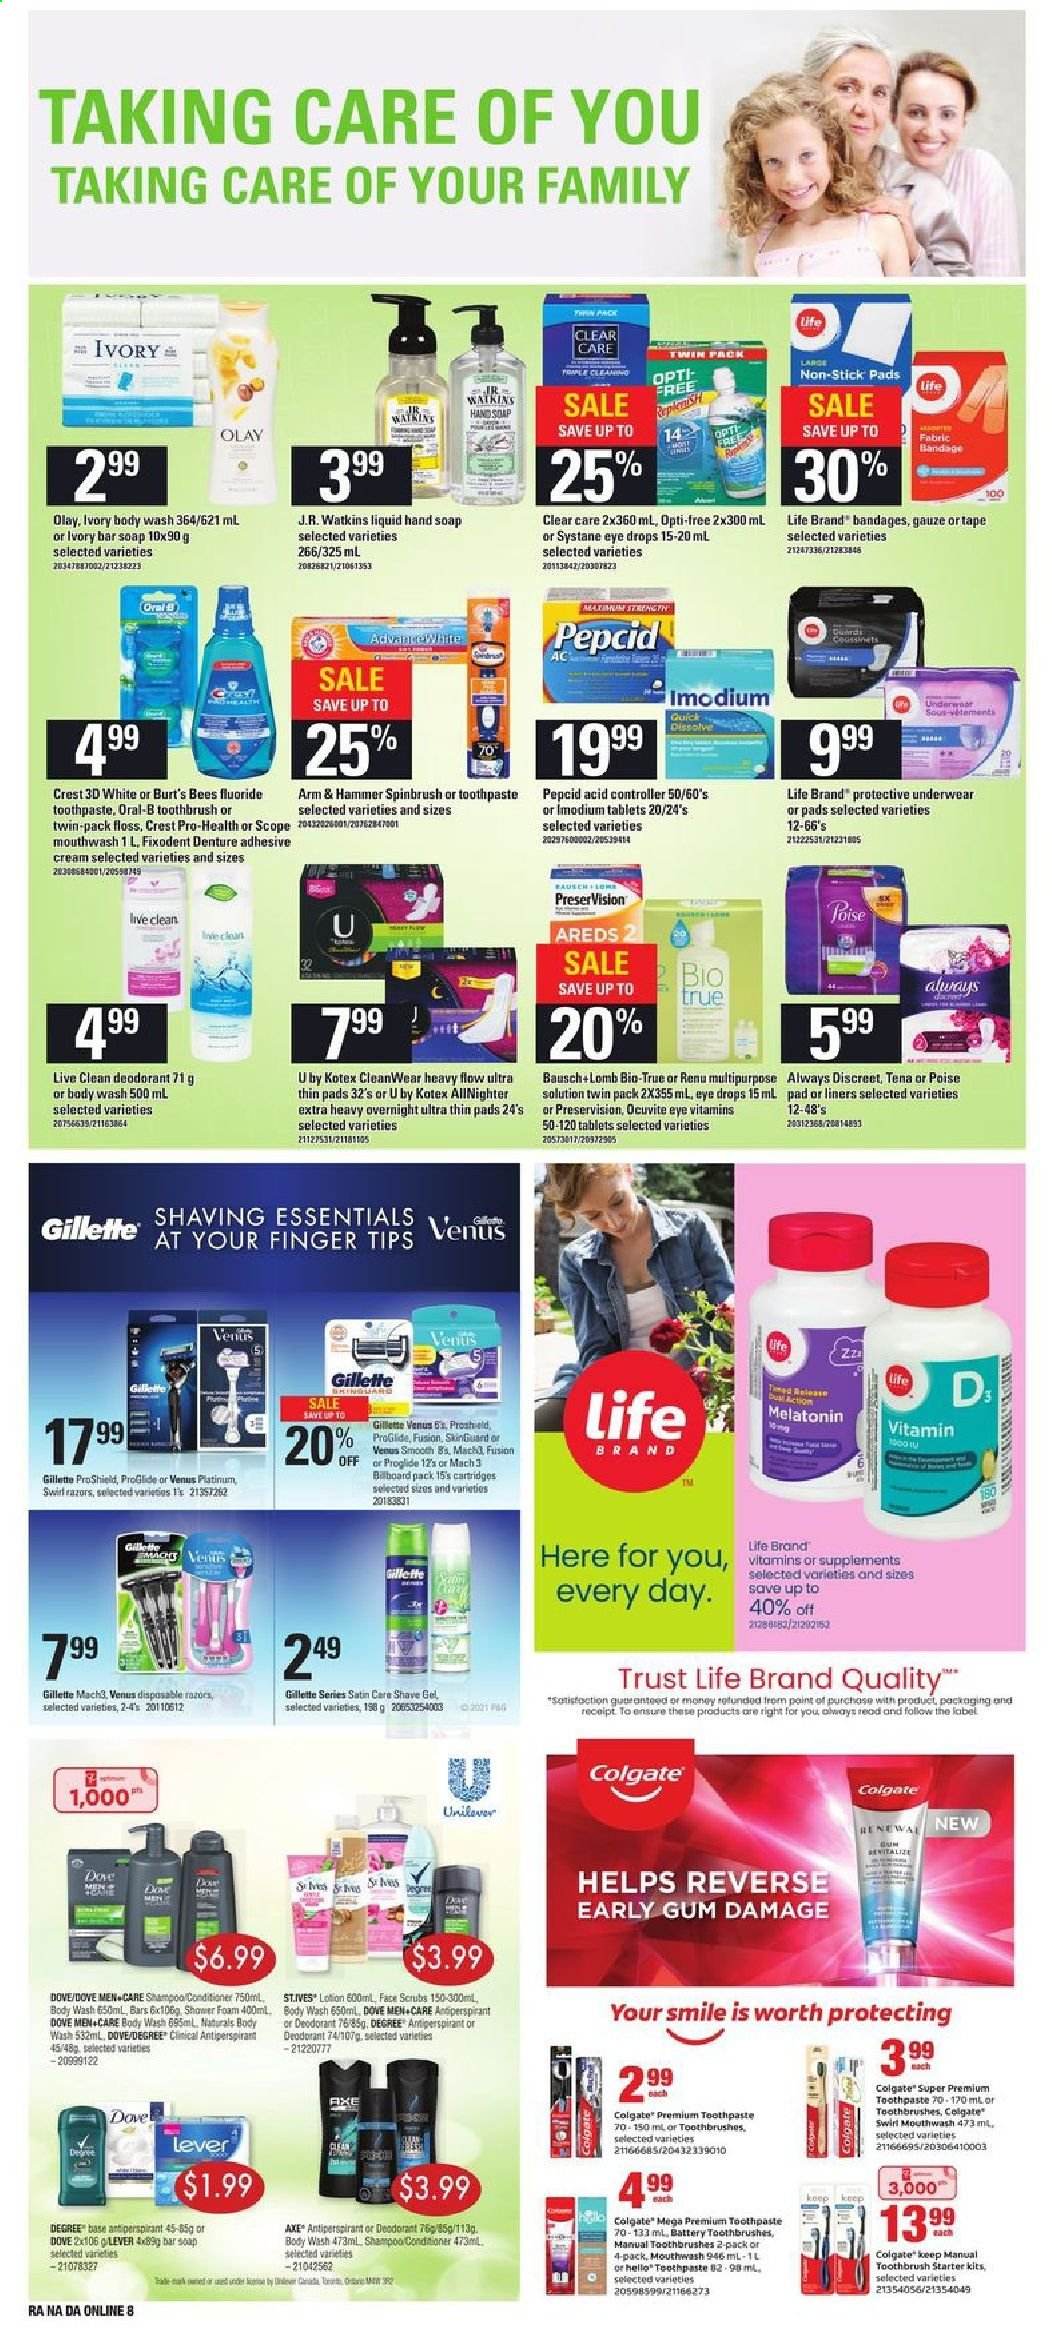 thumbnail - Atlantic Superstore Flyer - May 20, 2021 - May 26, 2021 - Sales products - ARM & HAMMER, body wash, hand soap, soap bar, soap, toothbrush, toothpaste, mouthwash, Fixodent, Crest, Always Discreet, Kotex, Olay, conditioner, body lotion, anti-perspirant, shave gel, Venus, Trust, Clear Care, Melatonin, Pepcid, eye drops, Gillette, shampoo, Systane, Oral-B, deodorant. Page 13.